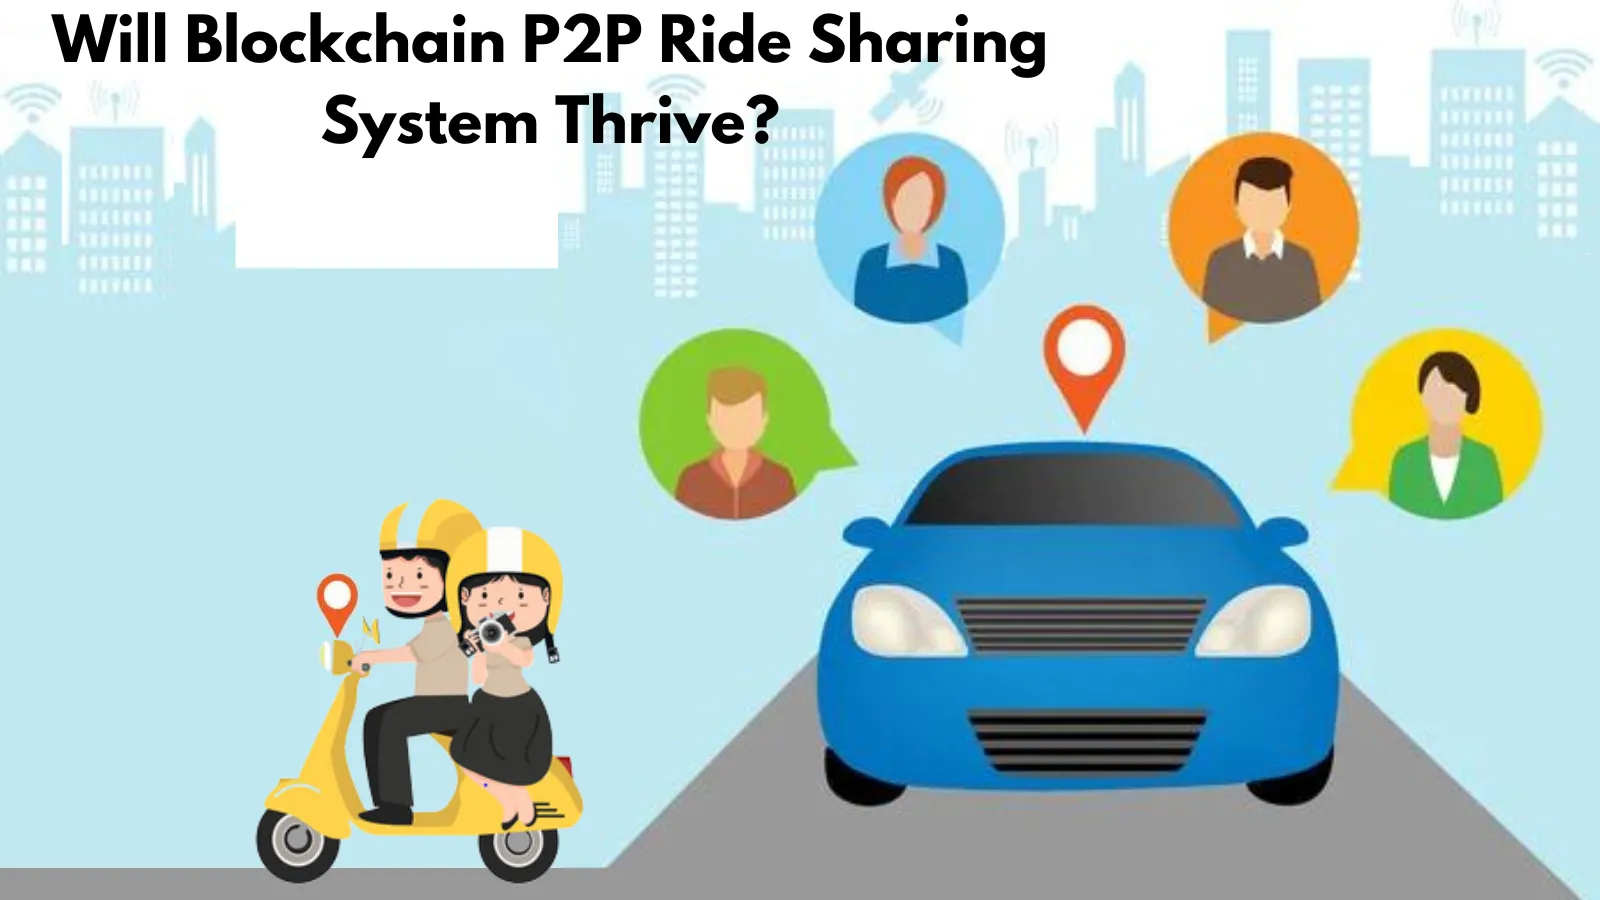 Will Blockchain P2P Ride Sharing System Accelerate? 